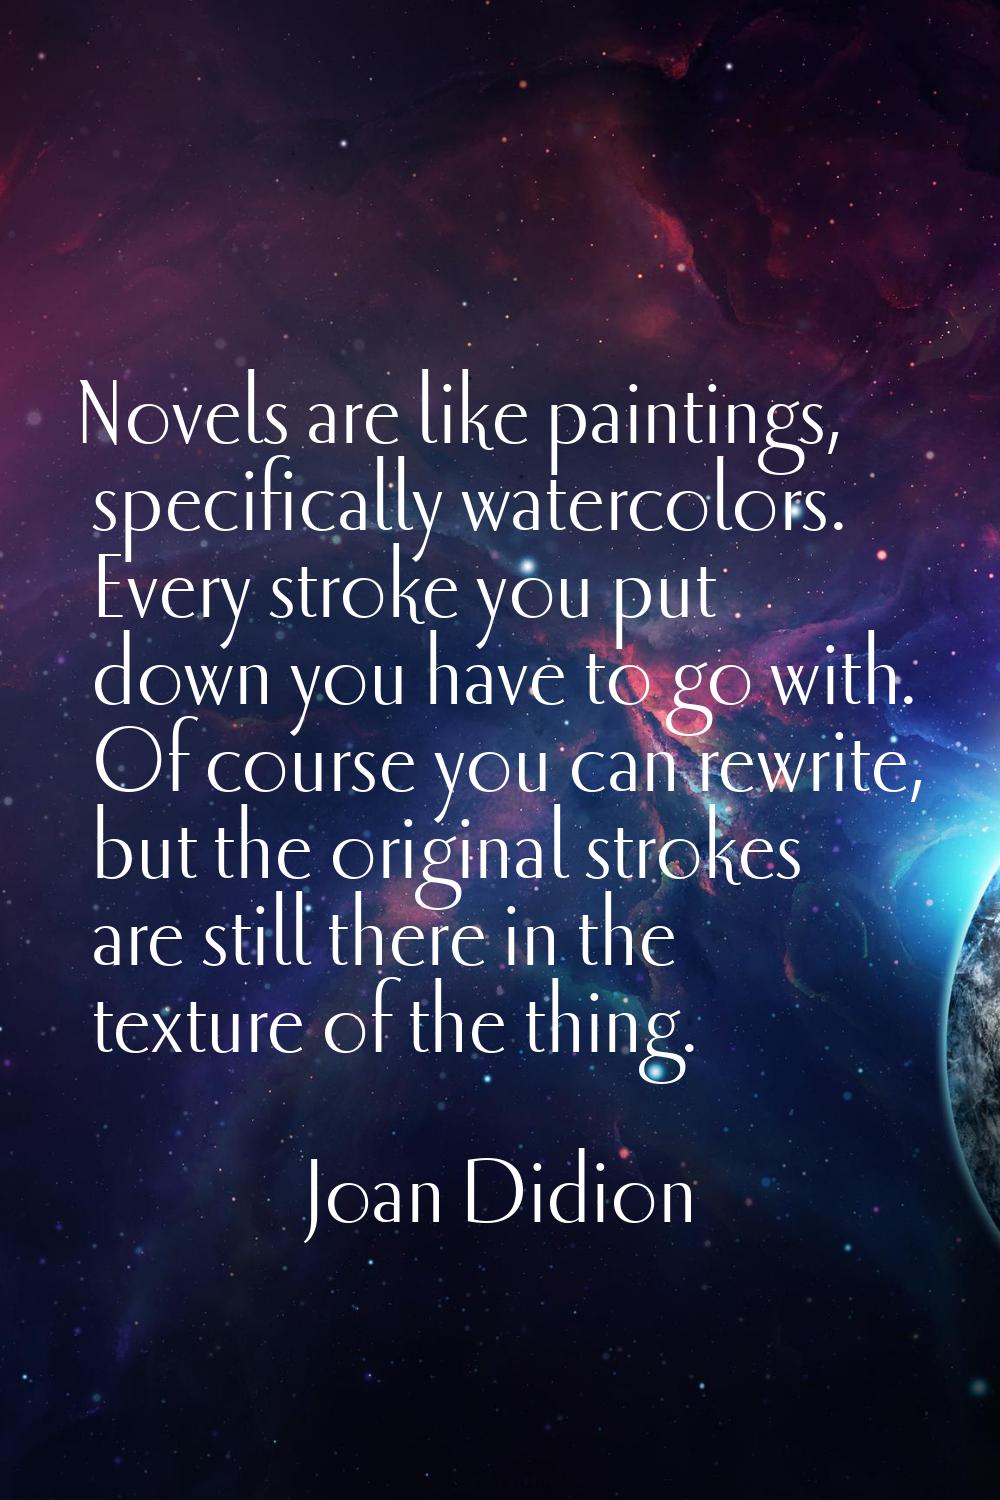 Novels are like paintings, specifically watercolors. Every stroke you put down you have to go with.